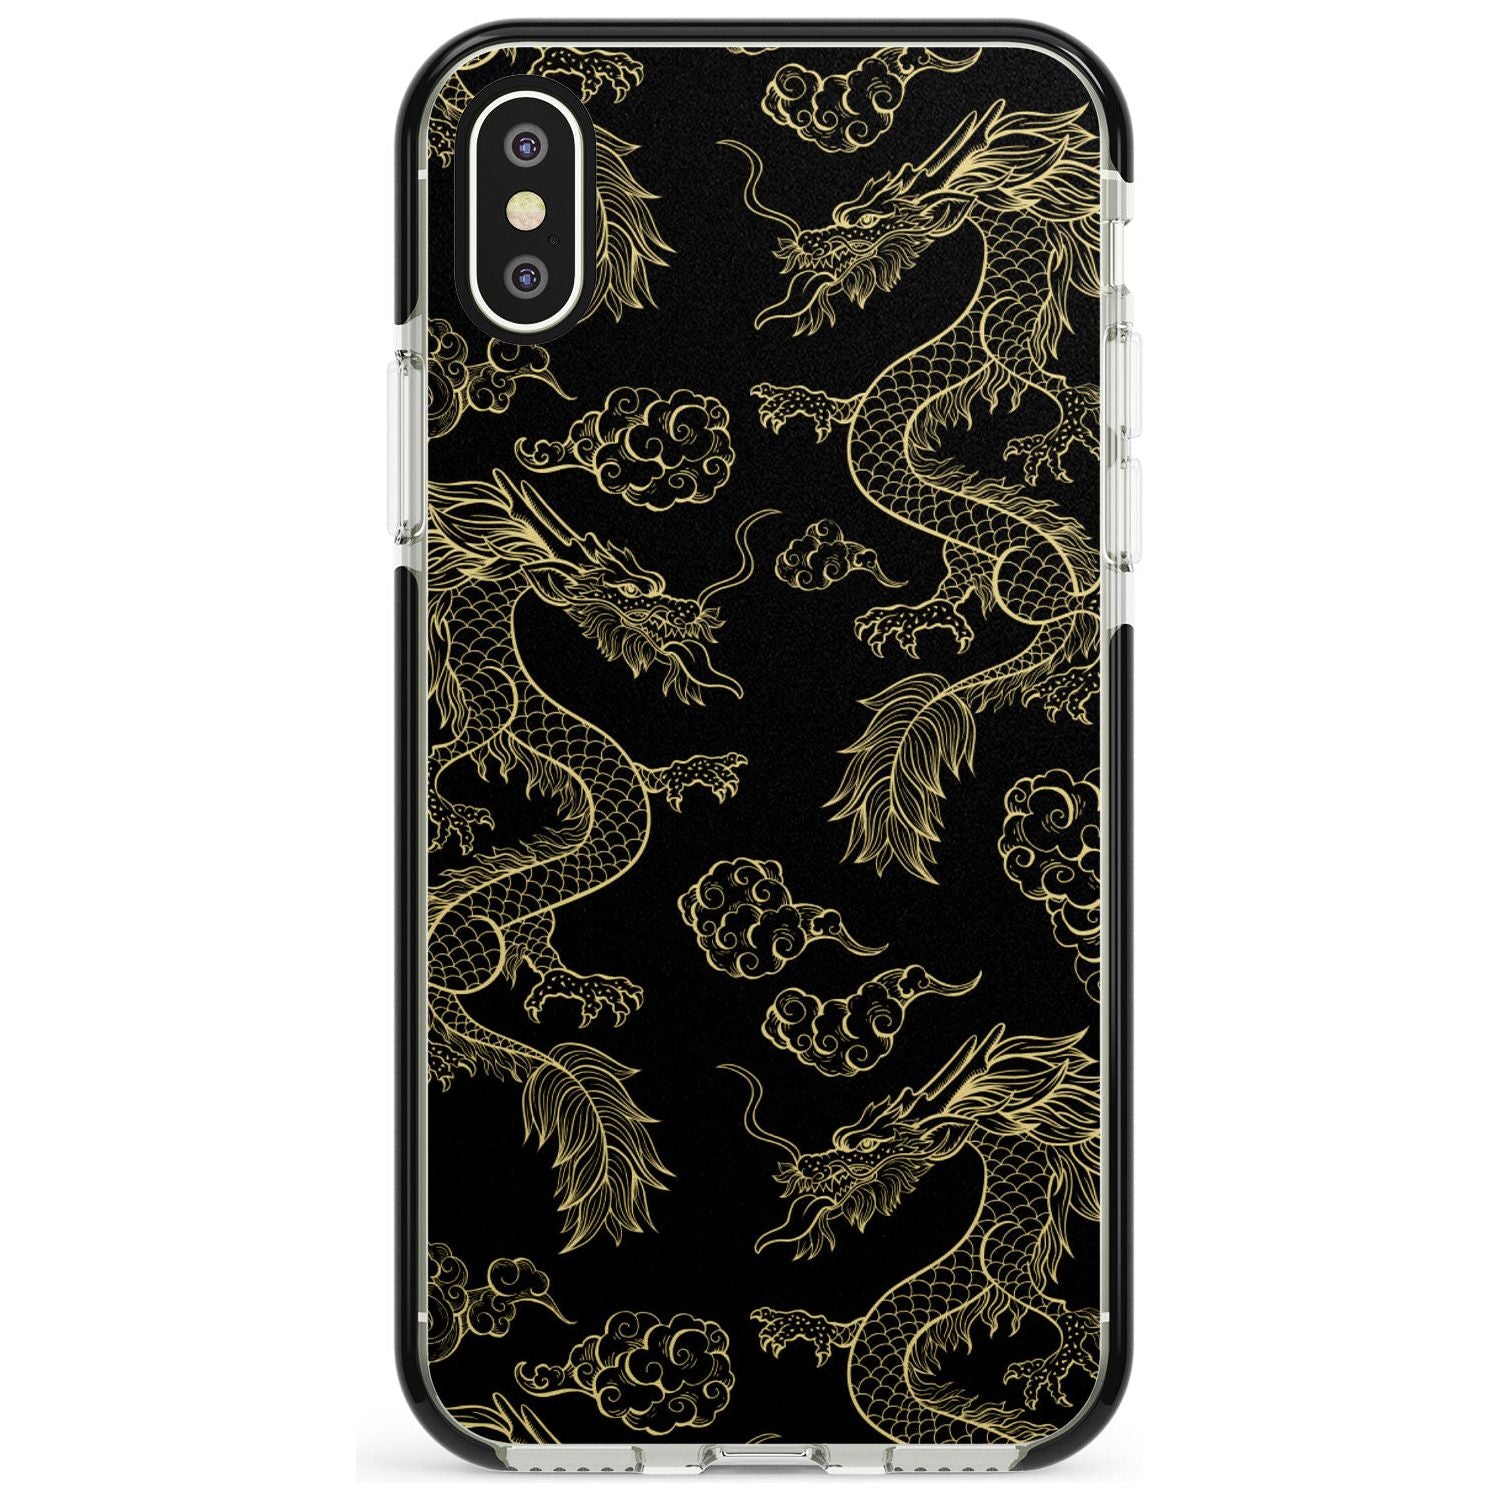 Black and Gold Dragon Pattern Black Impact Phone Case for iPhone X XS Max XR